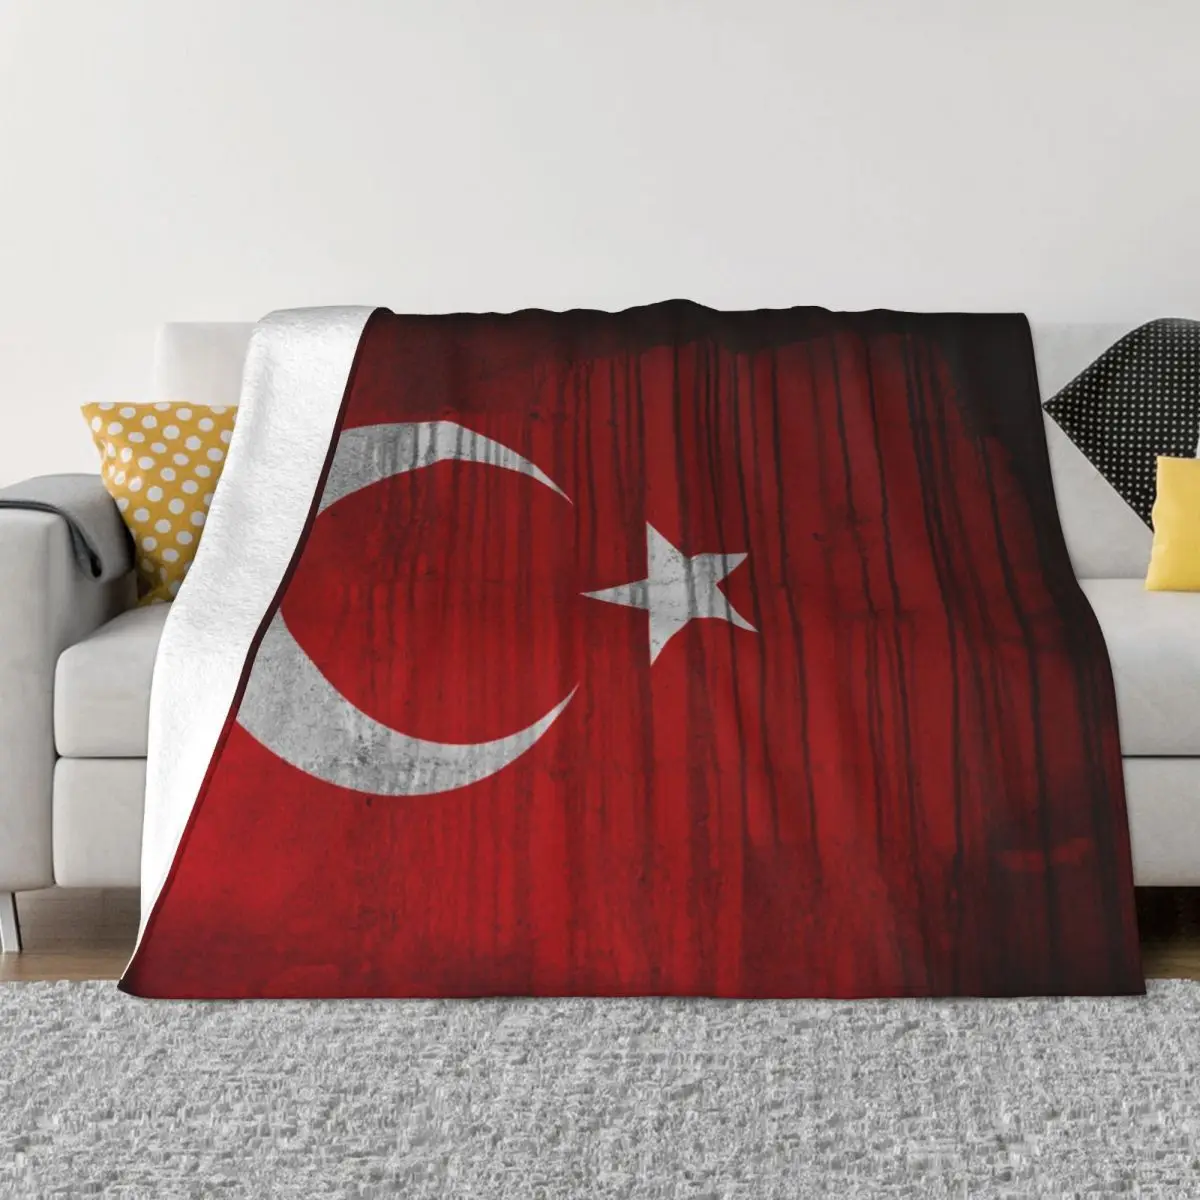 

Turkey Flag Blanket Fleece Print Multifunction Lightweight Thin Throw Blankets for Bed Couch Bedding Throws